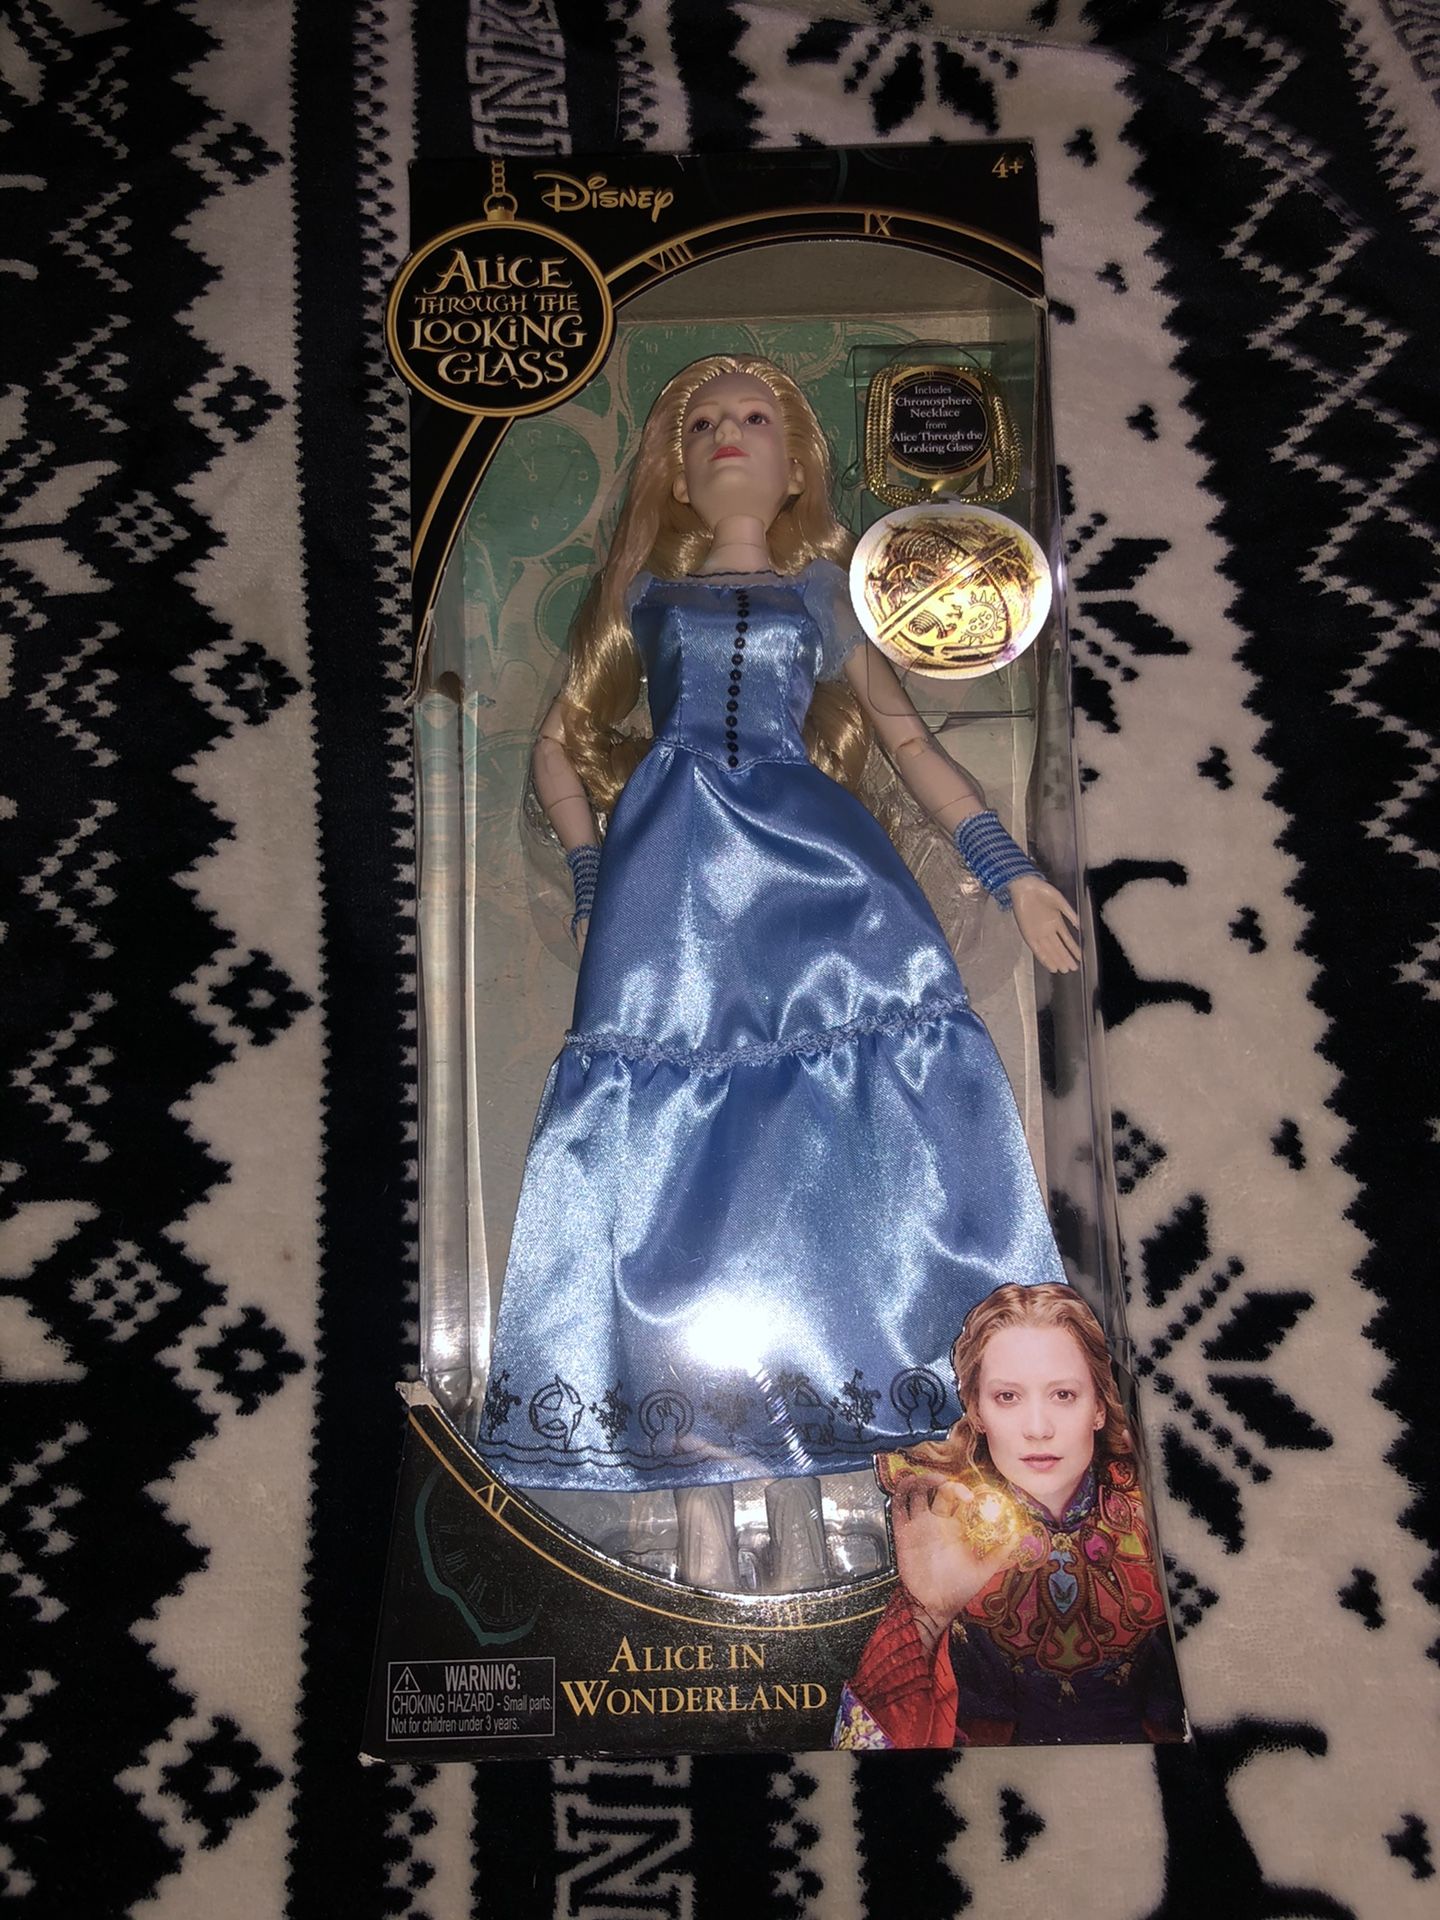 Alice Through the Looking Glass doll